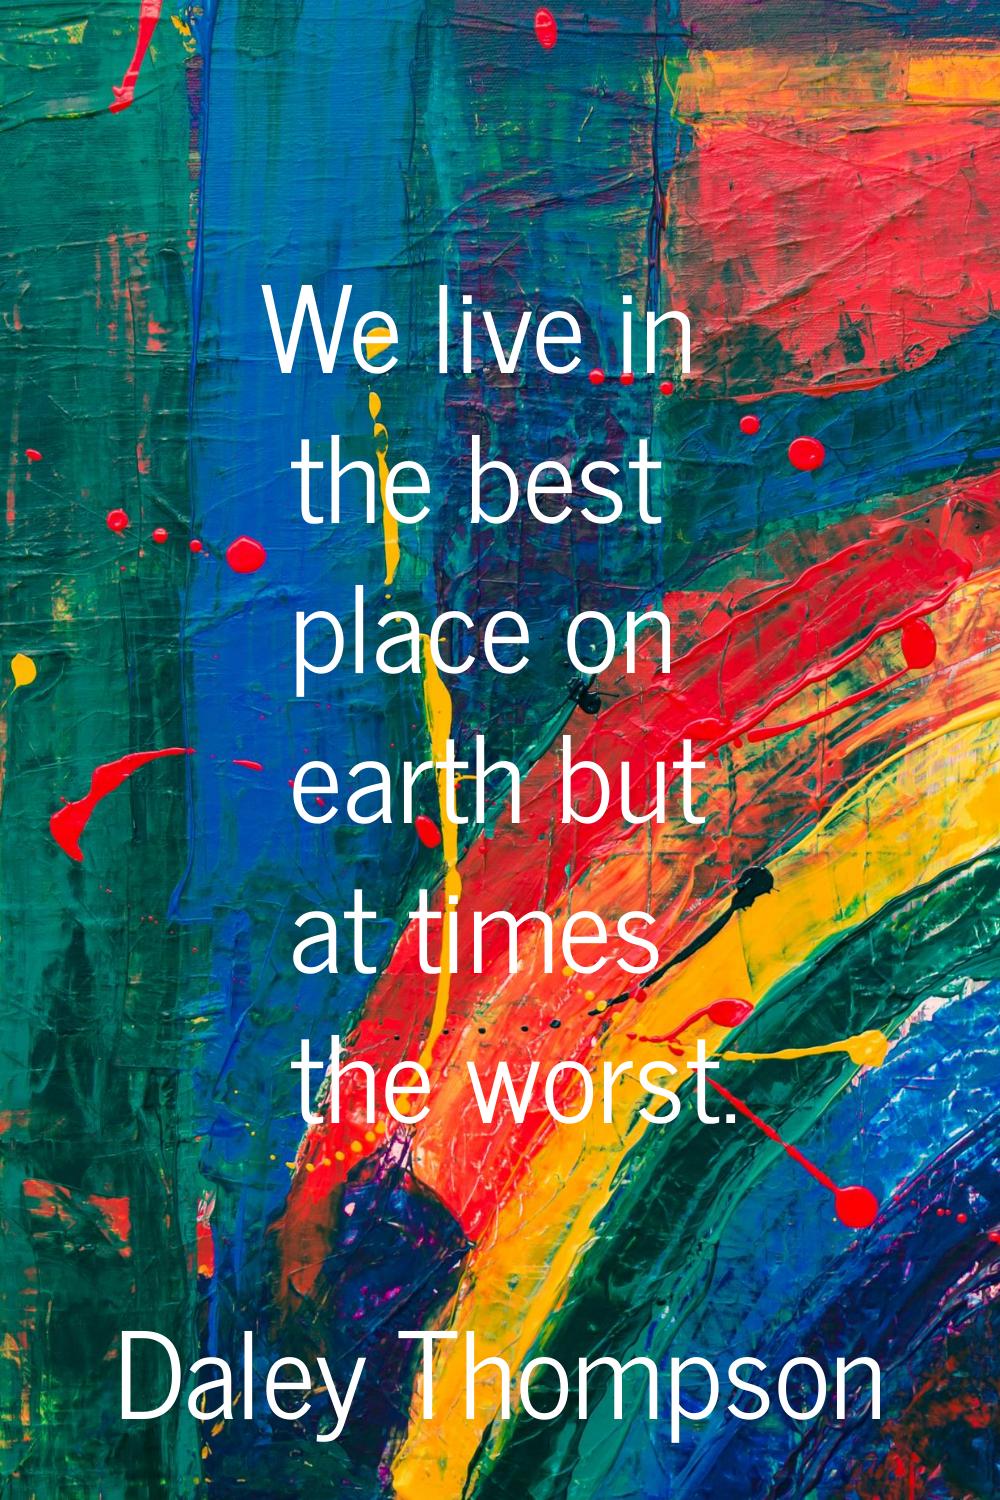 We live in the best place on earth but at times the worst.